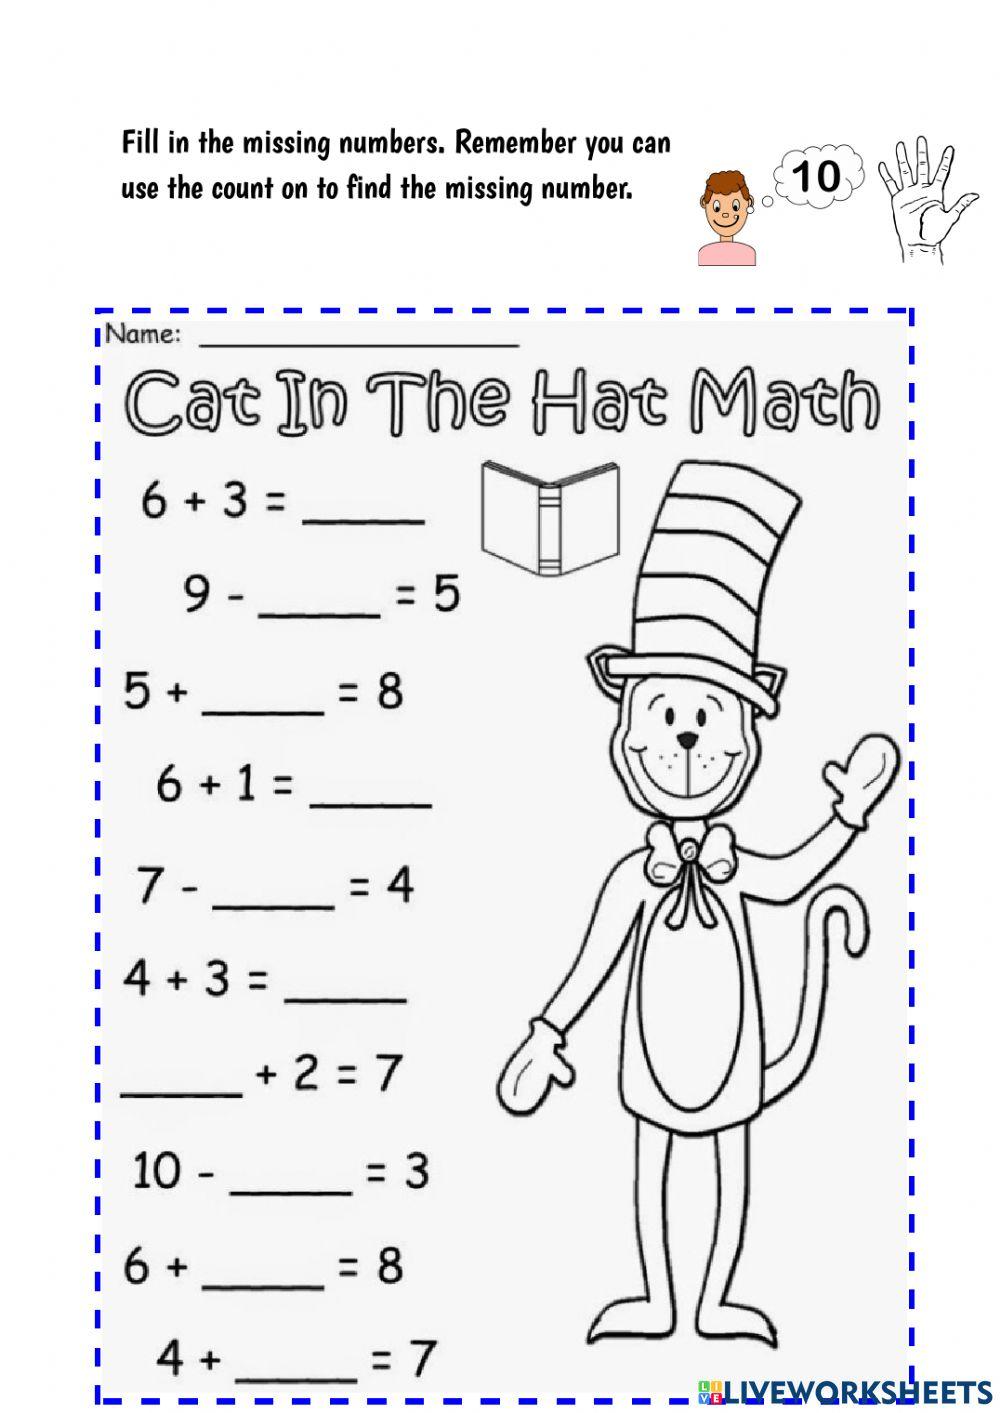 Cat In The Hat Math: Missing Numbers